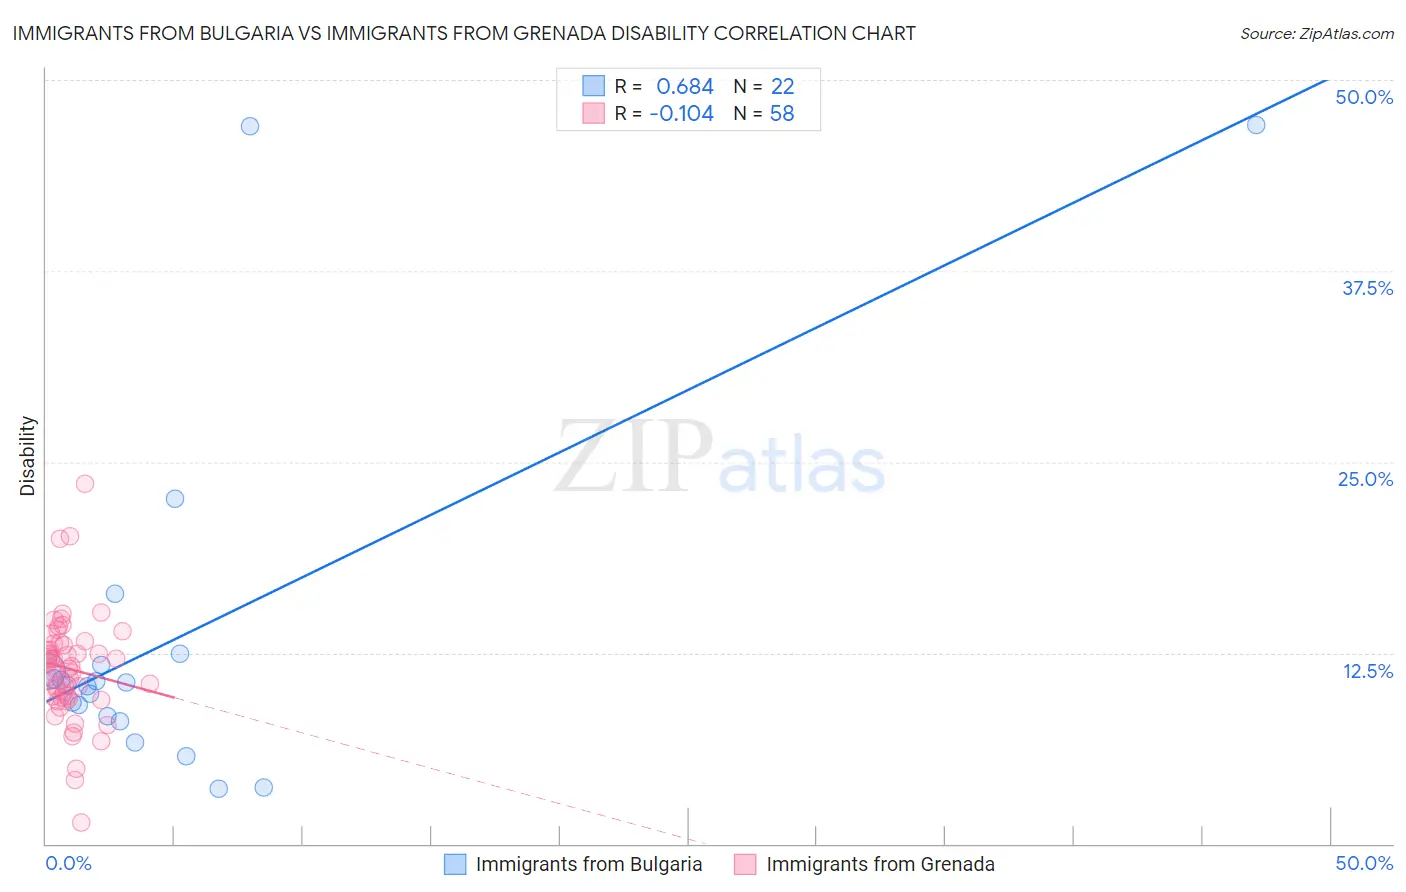 Immigrants from Bulgaria vs Immigrants from Grenada Disability